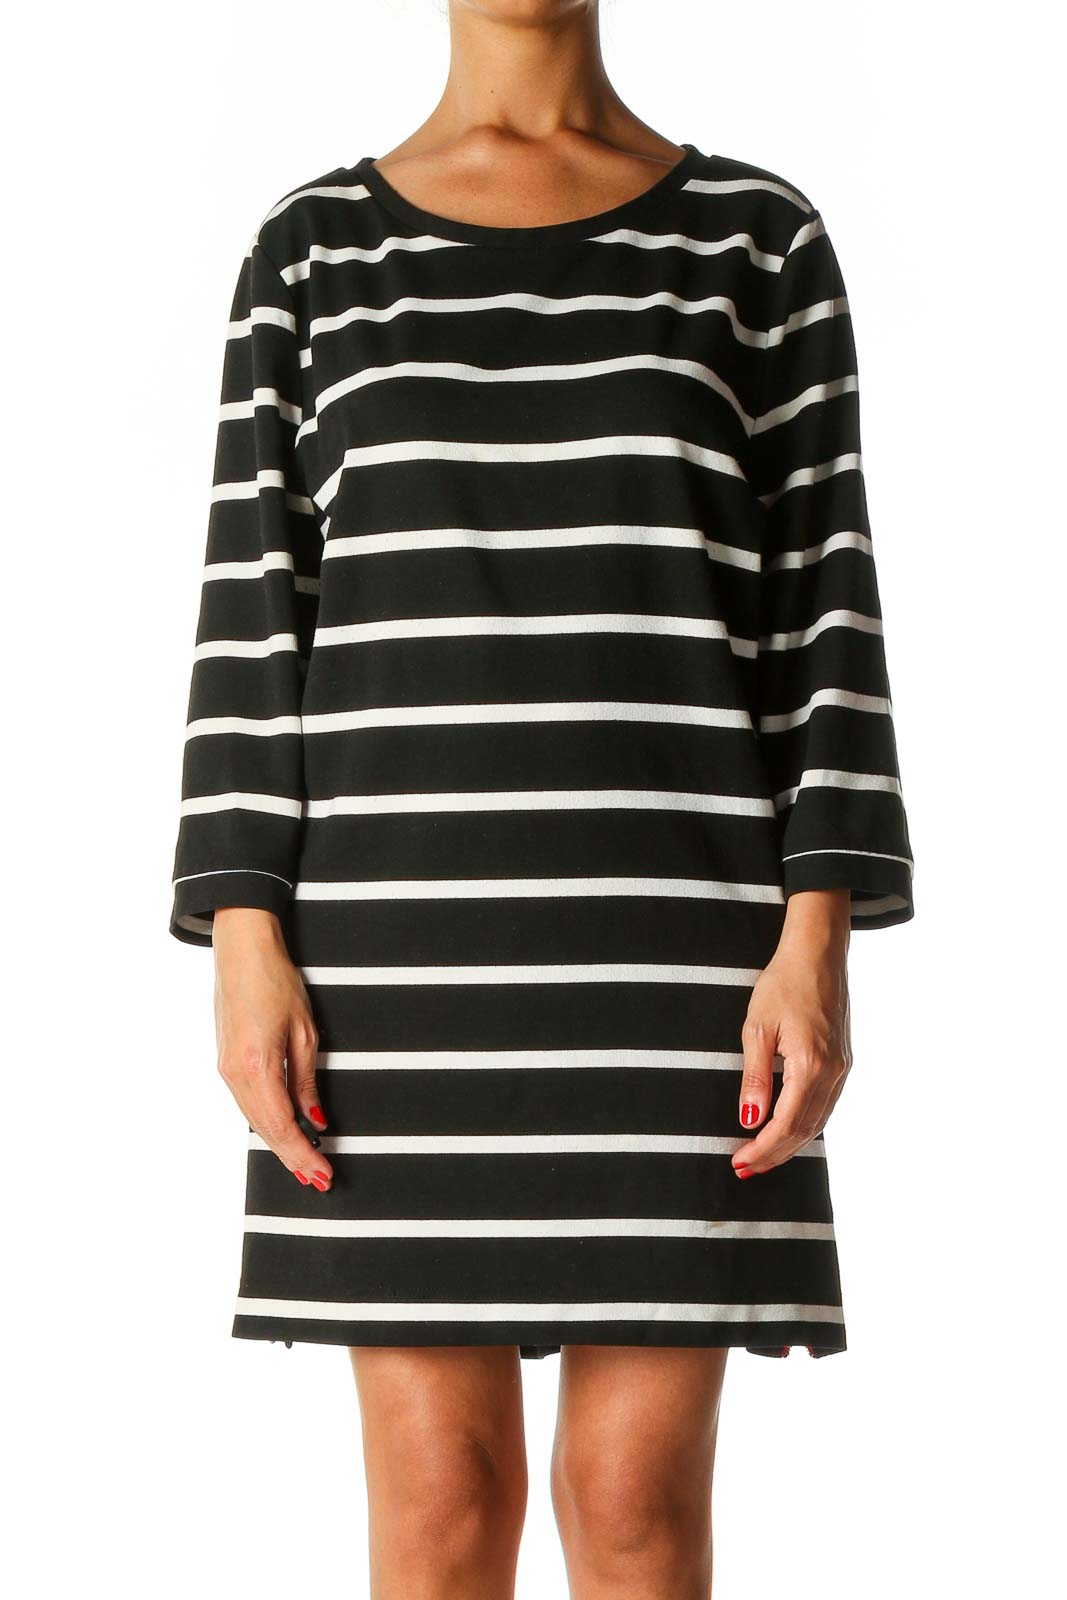 Black Striped Casual Shift Dress Front